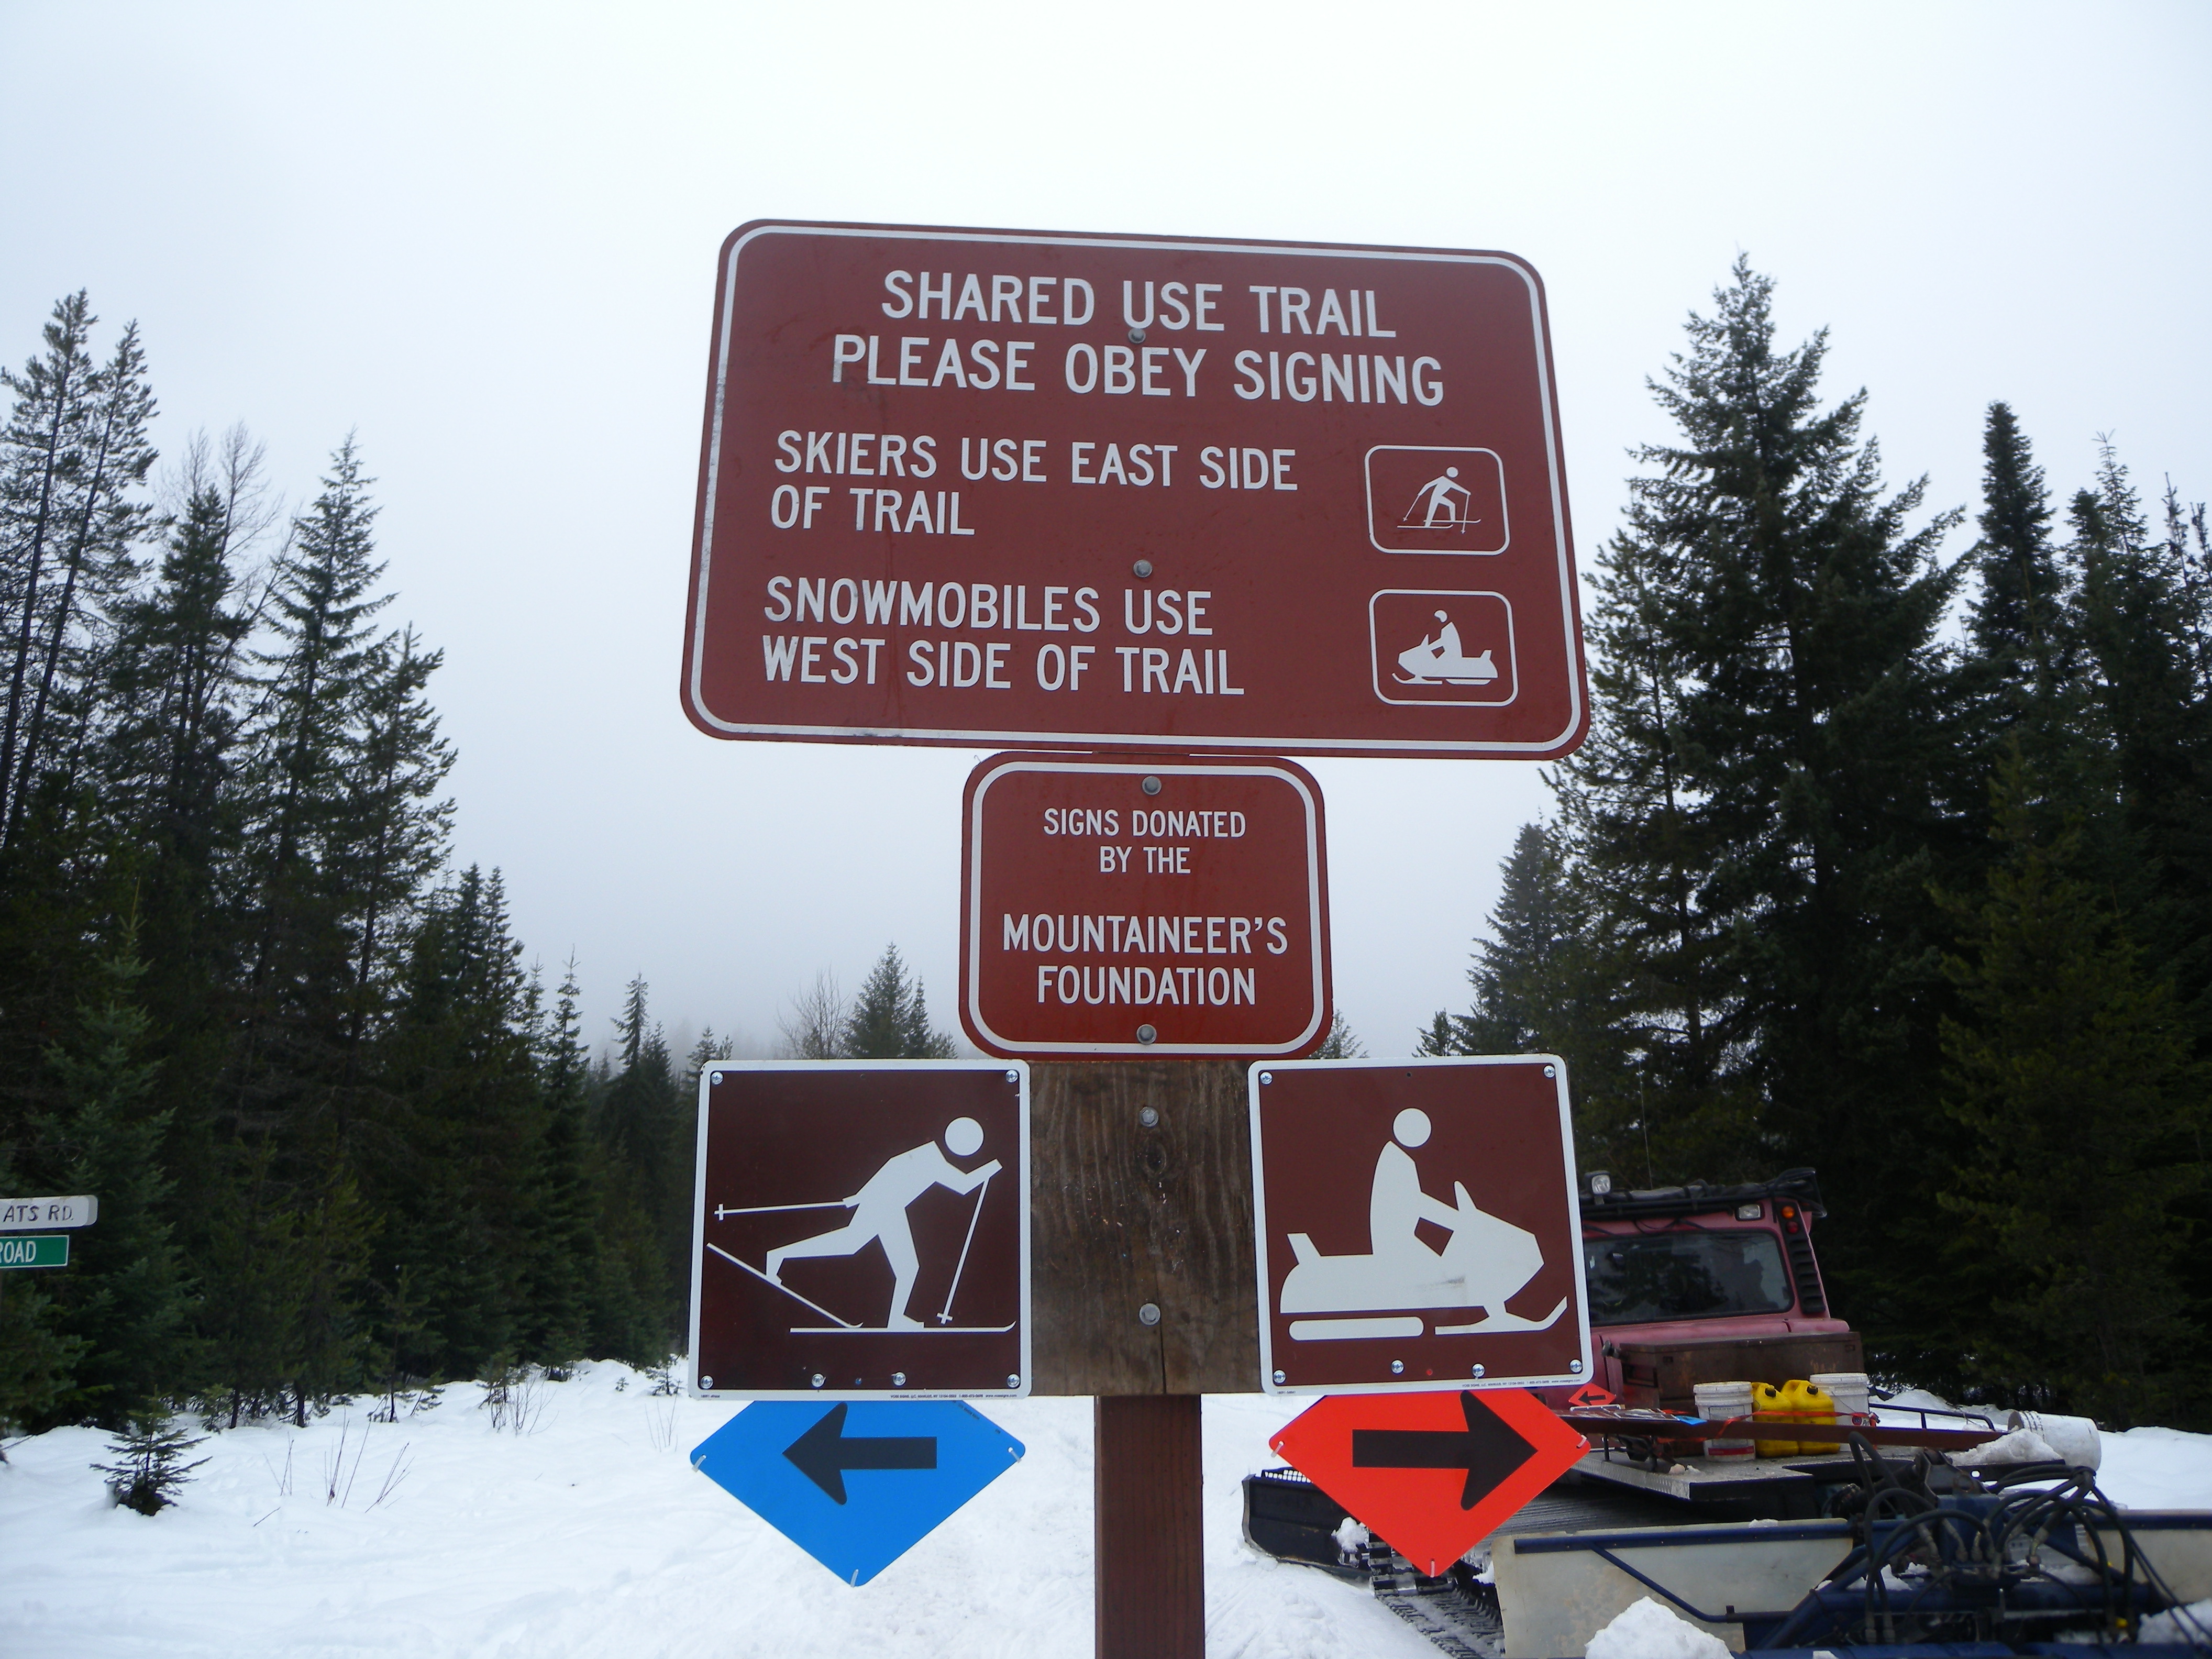 Shared use of trail sign